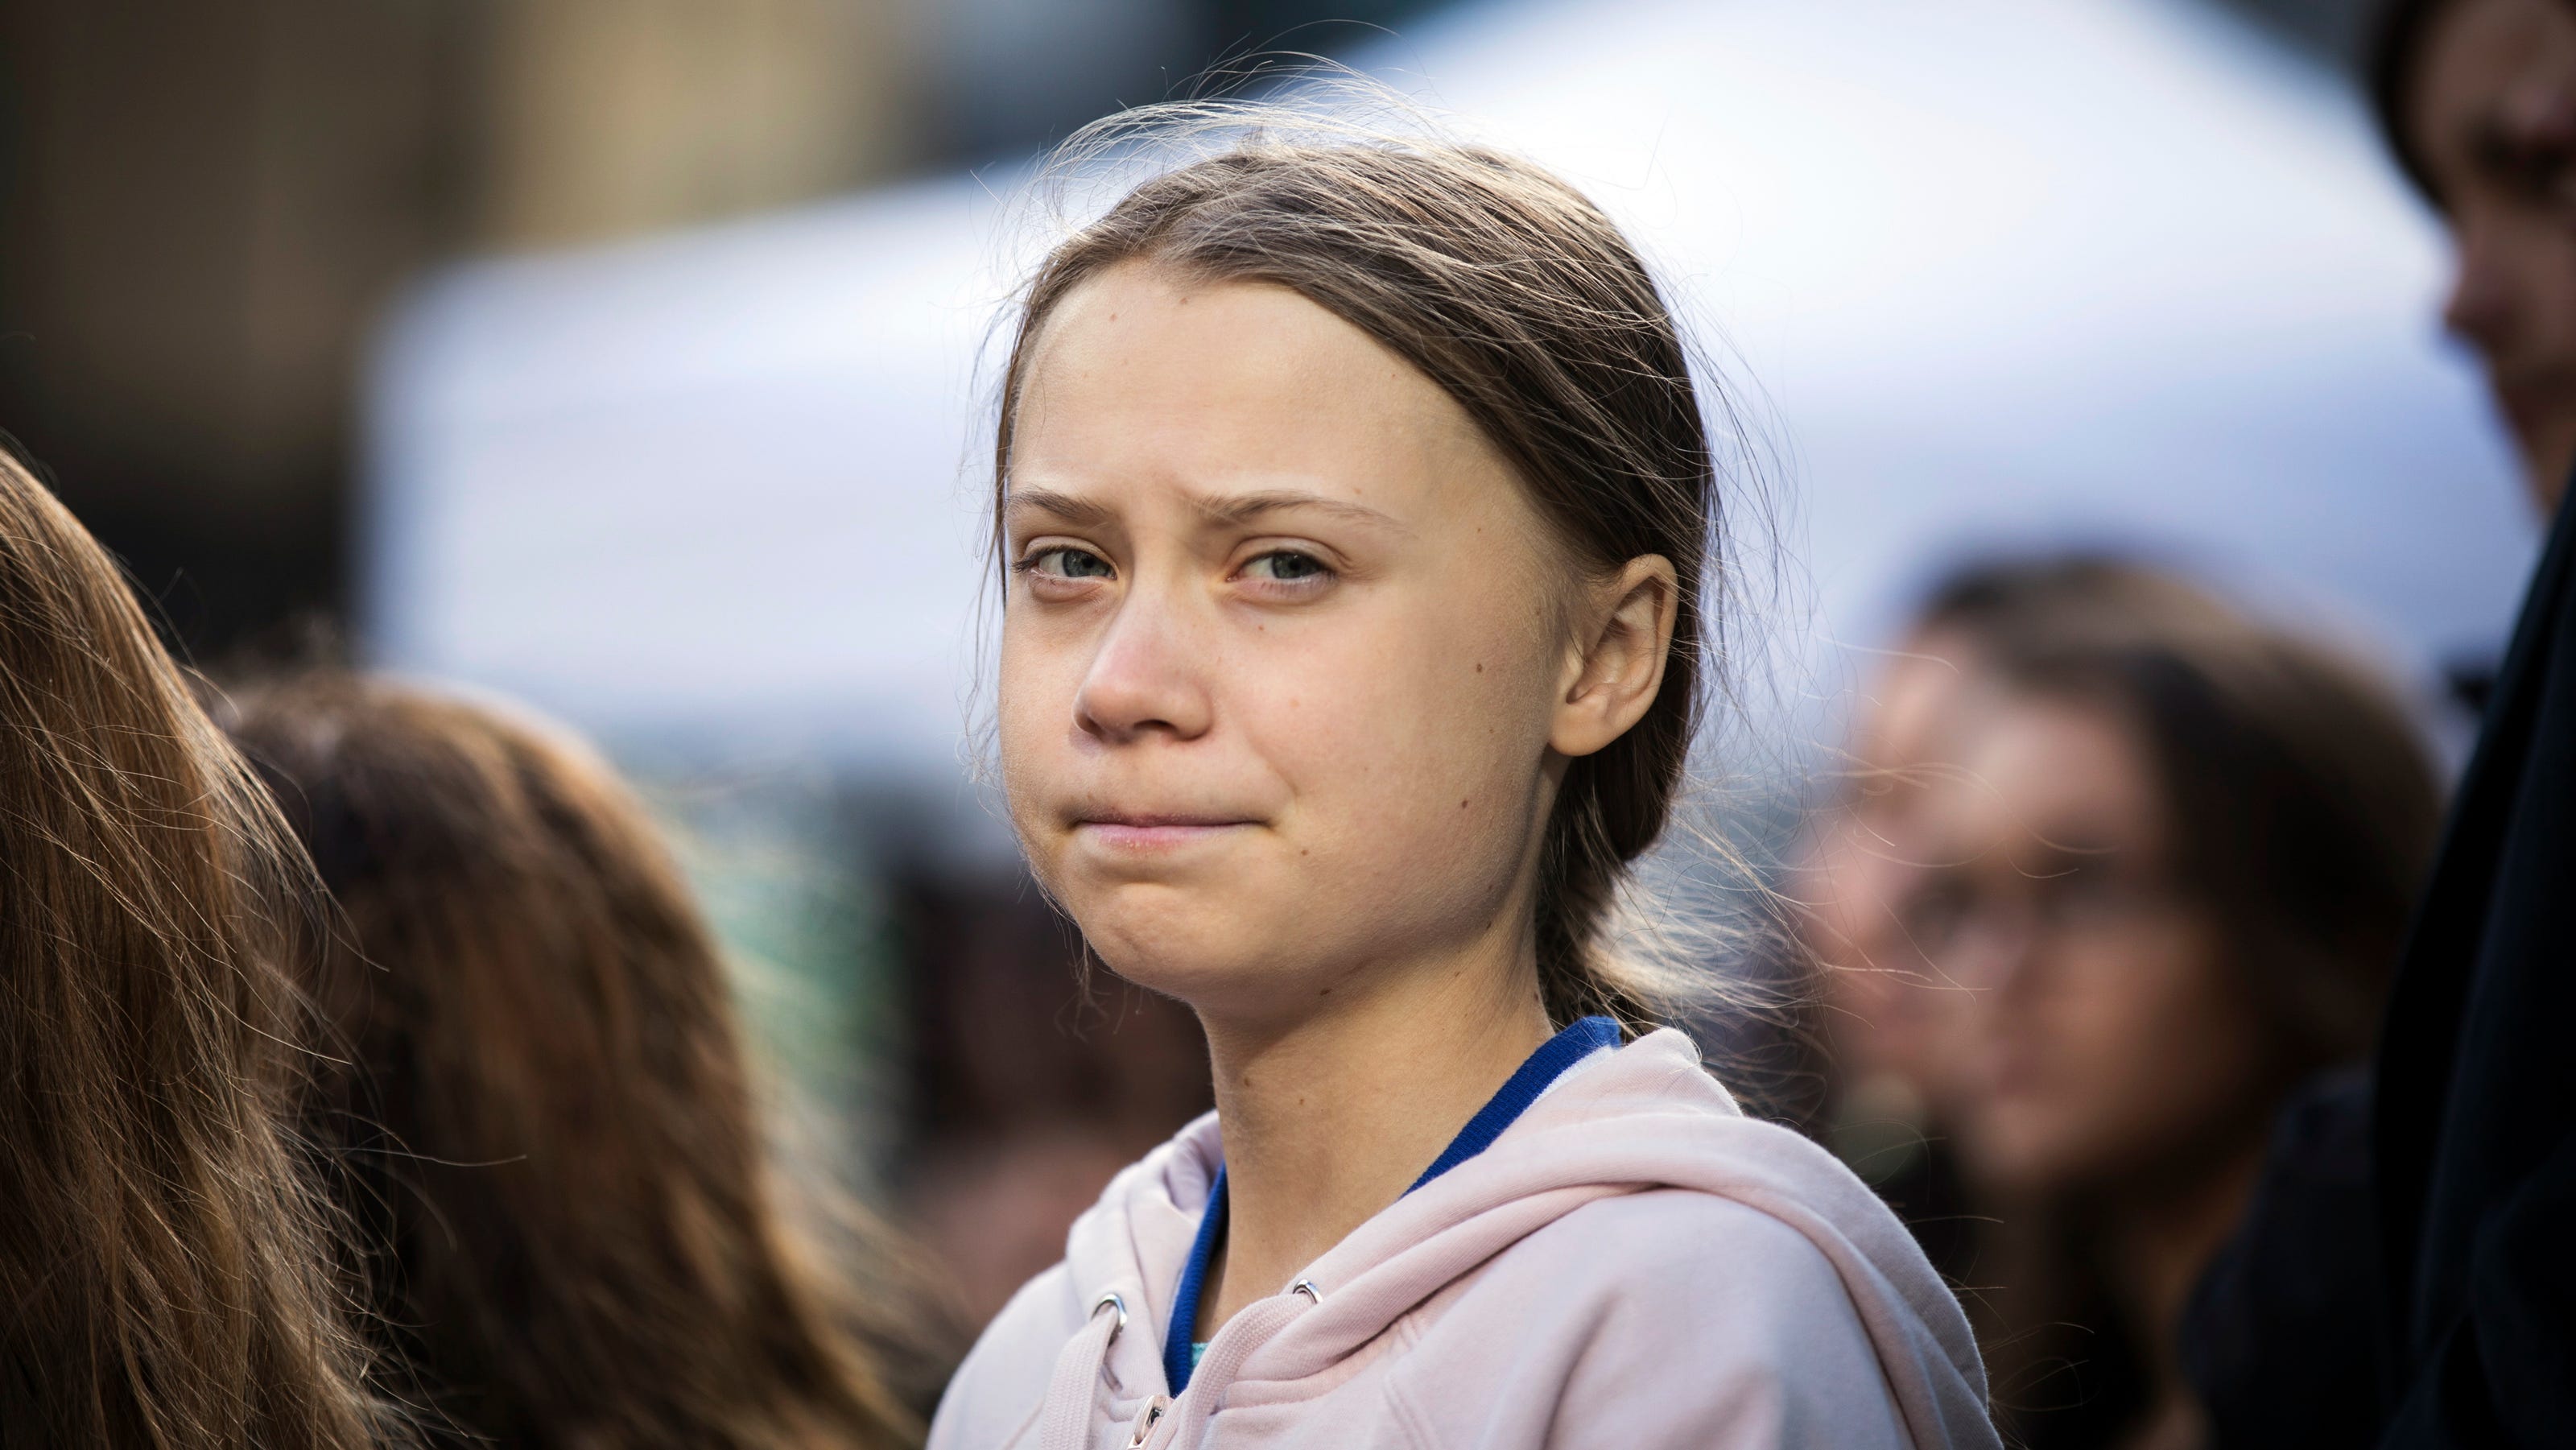 Greta Thunberg is sailing back across the Atlantic. Here's what she accomplished while in the US - USA TODAY